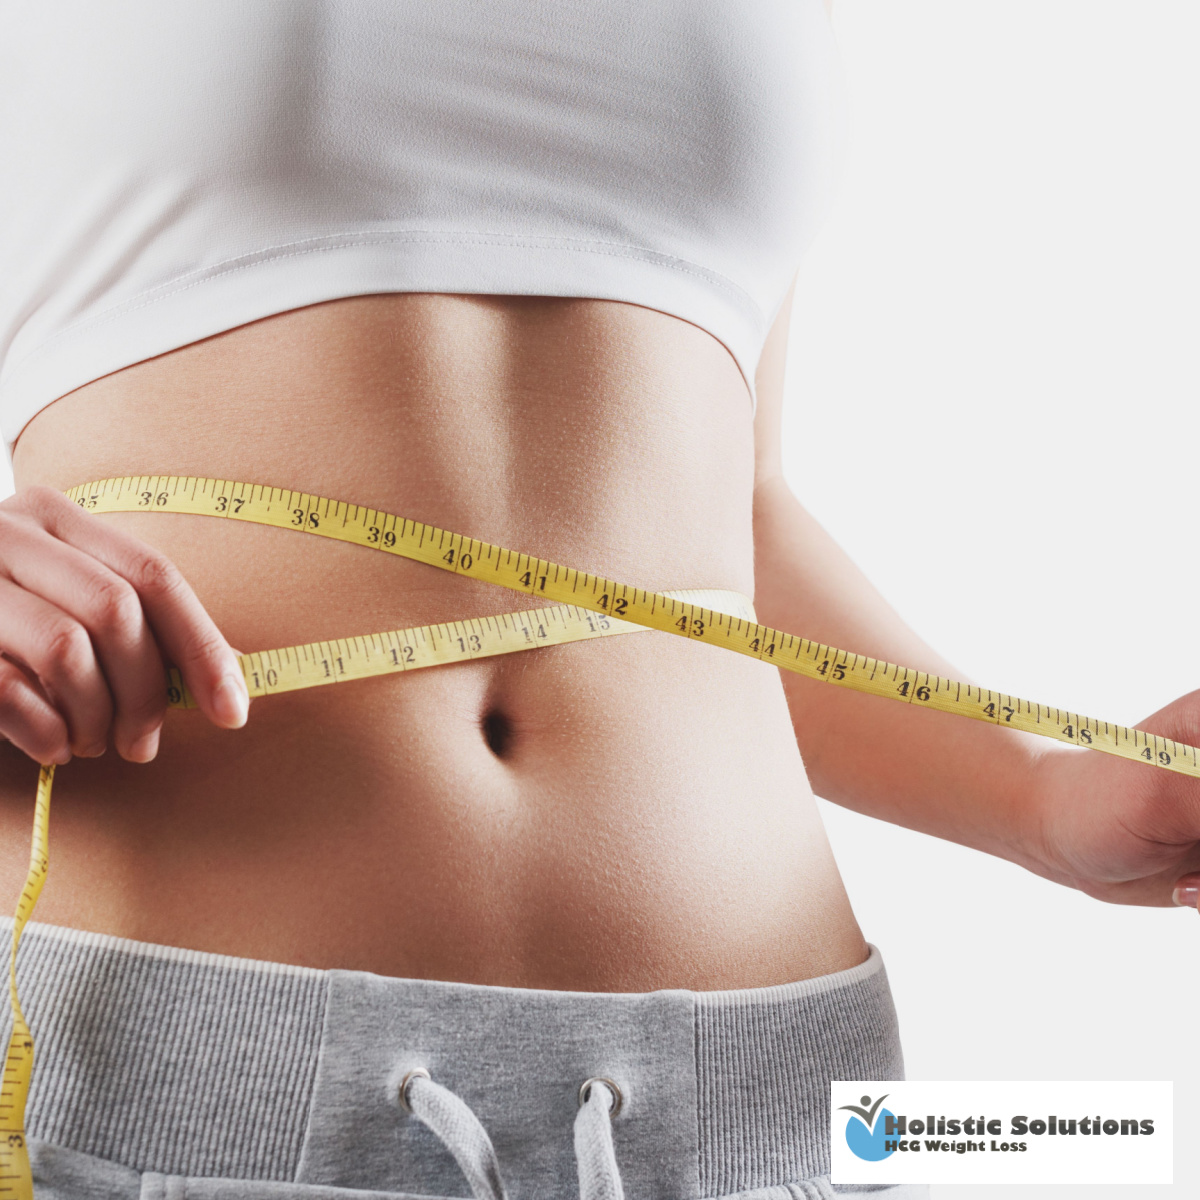 HCG Injections Near El Cajon Could Be The Weight Loss Boost You Need